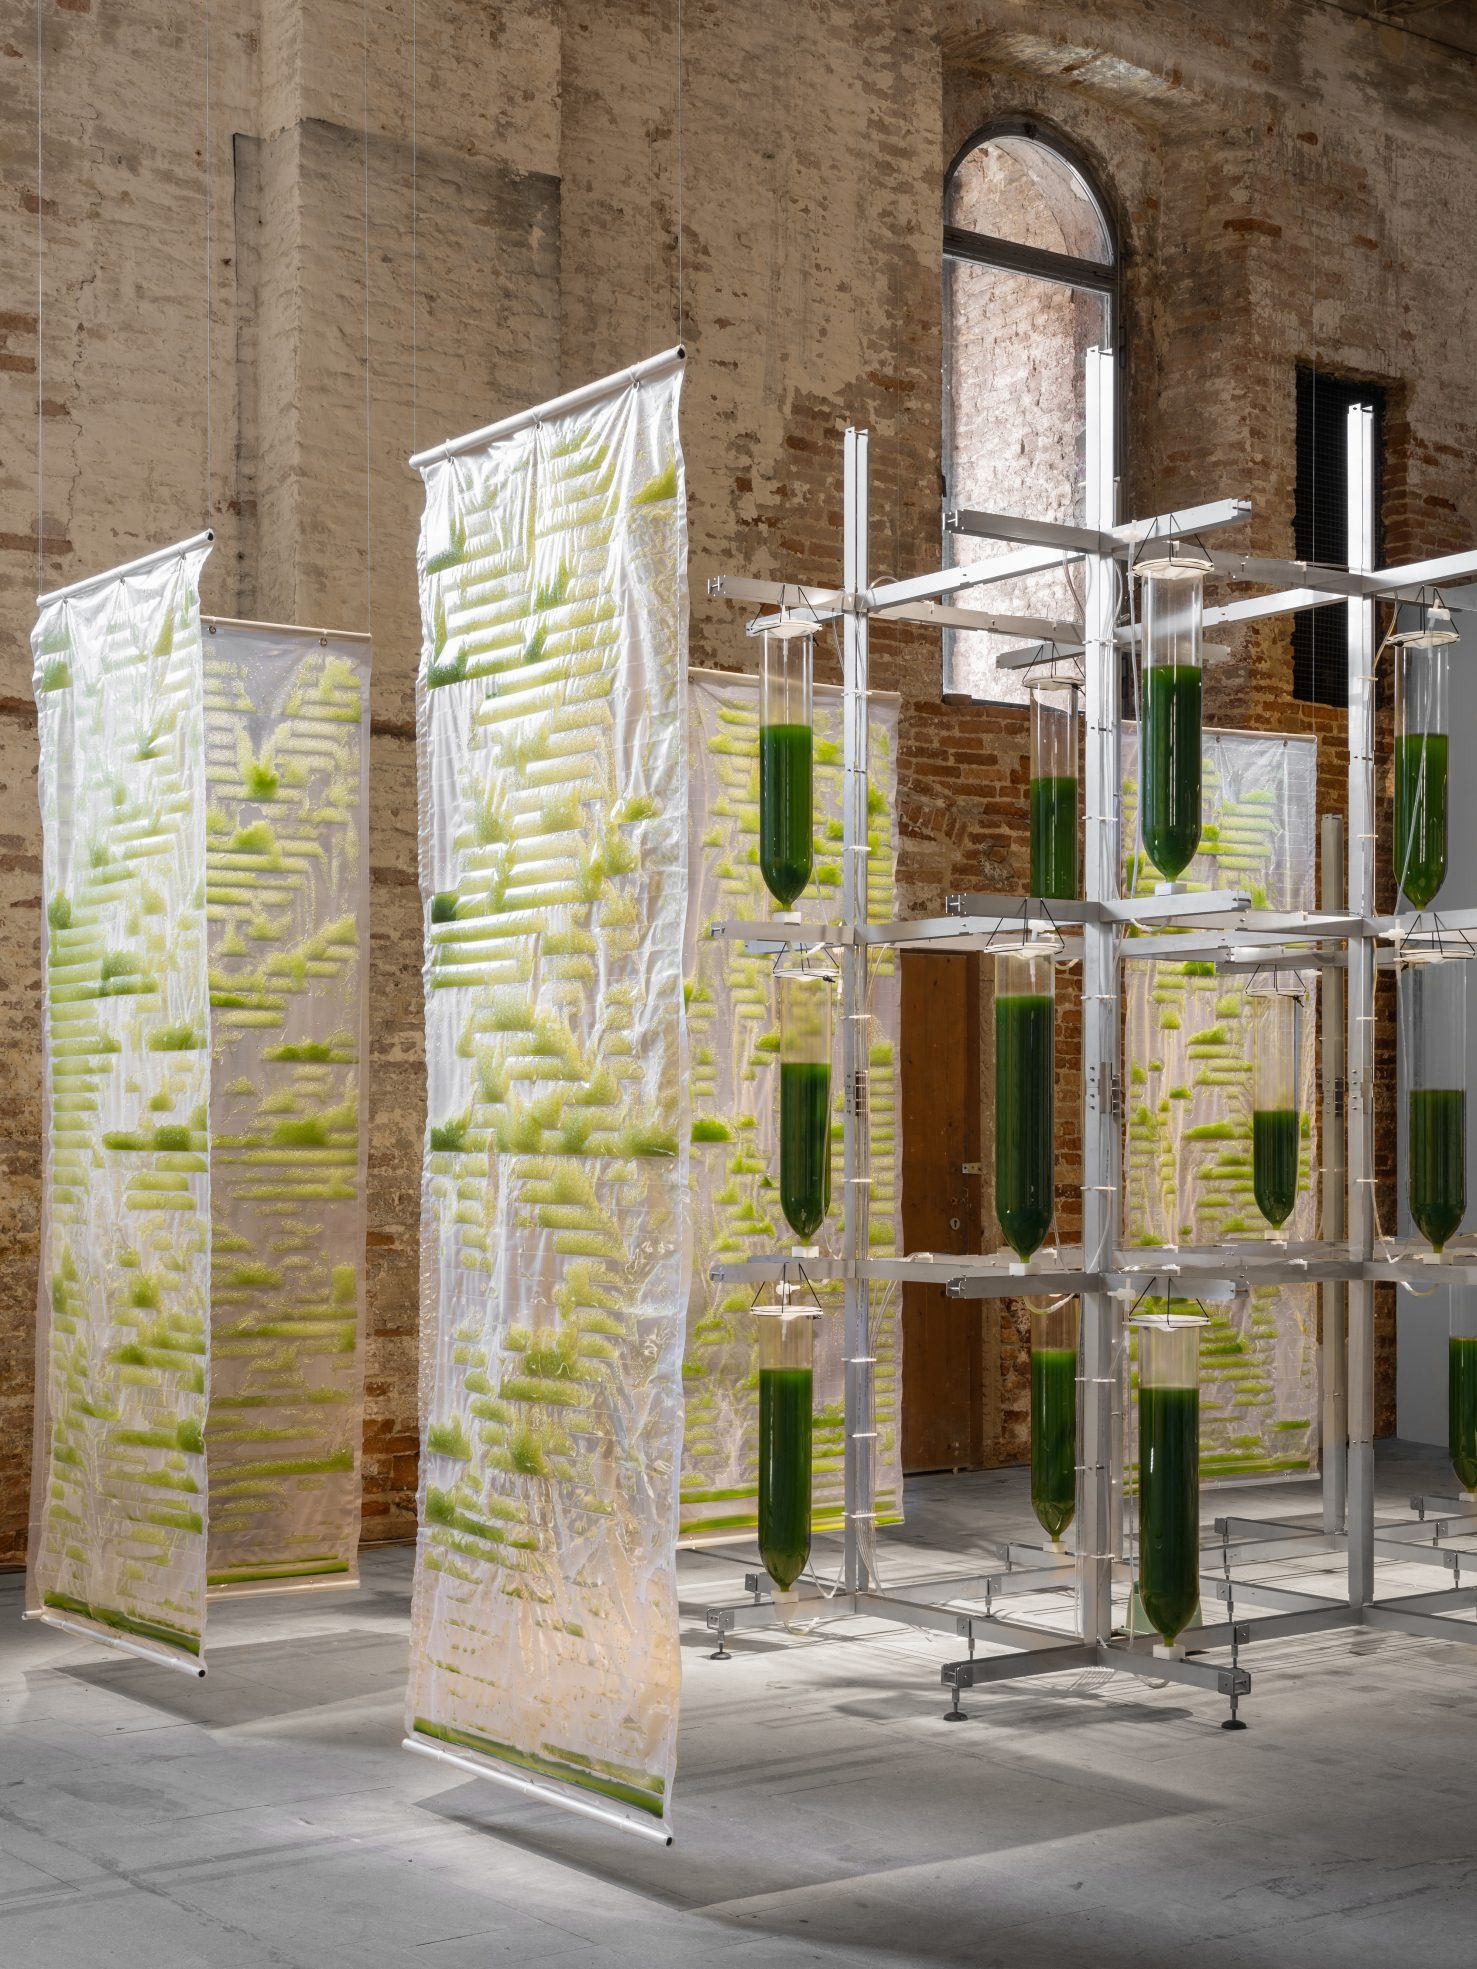 EcoLogicStudio, »Bit.Bio.Bot«, 2021, Stainless steel structure, lab grade borosilicate glass, bioplastic components filled with micro-algae cultures